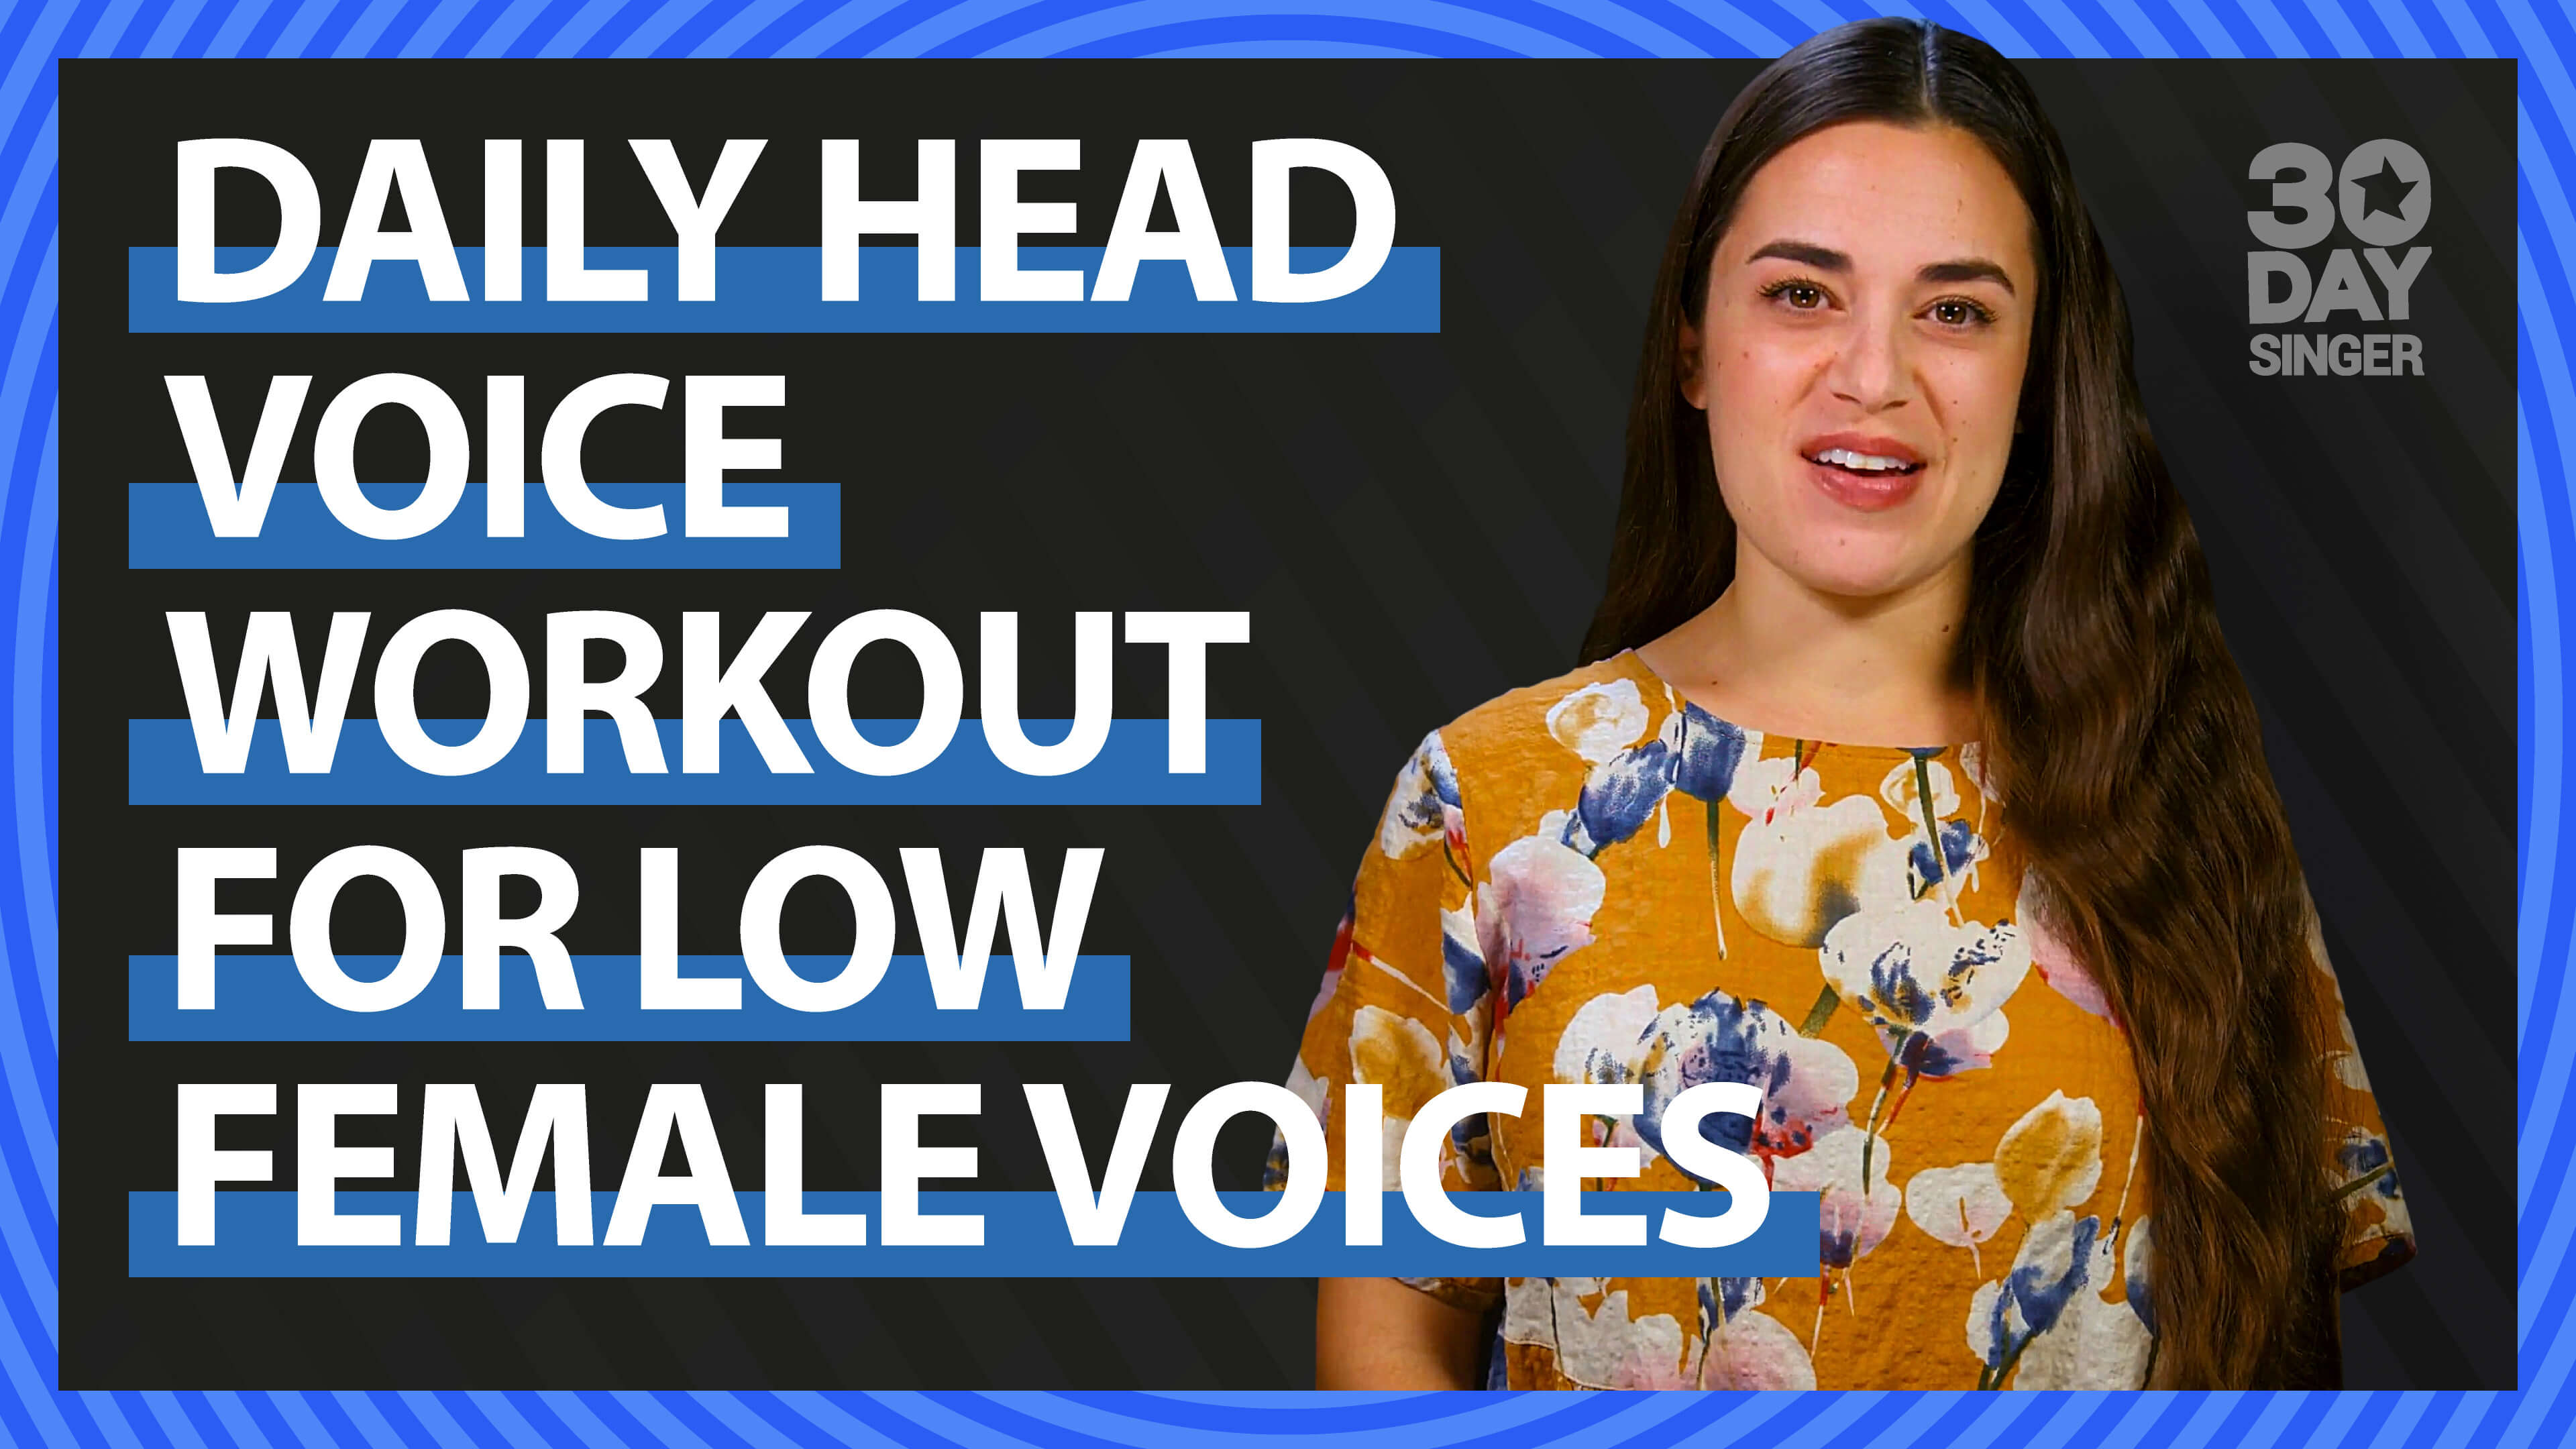 Daily Head Voice Workout For Low Female Voices